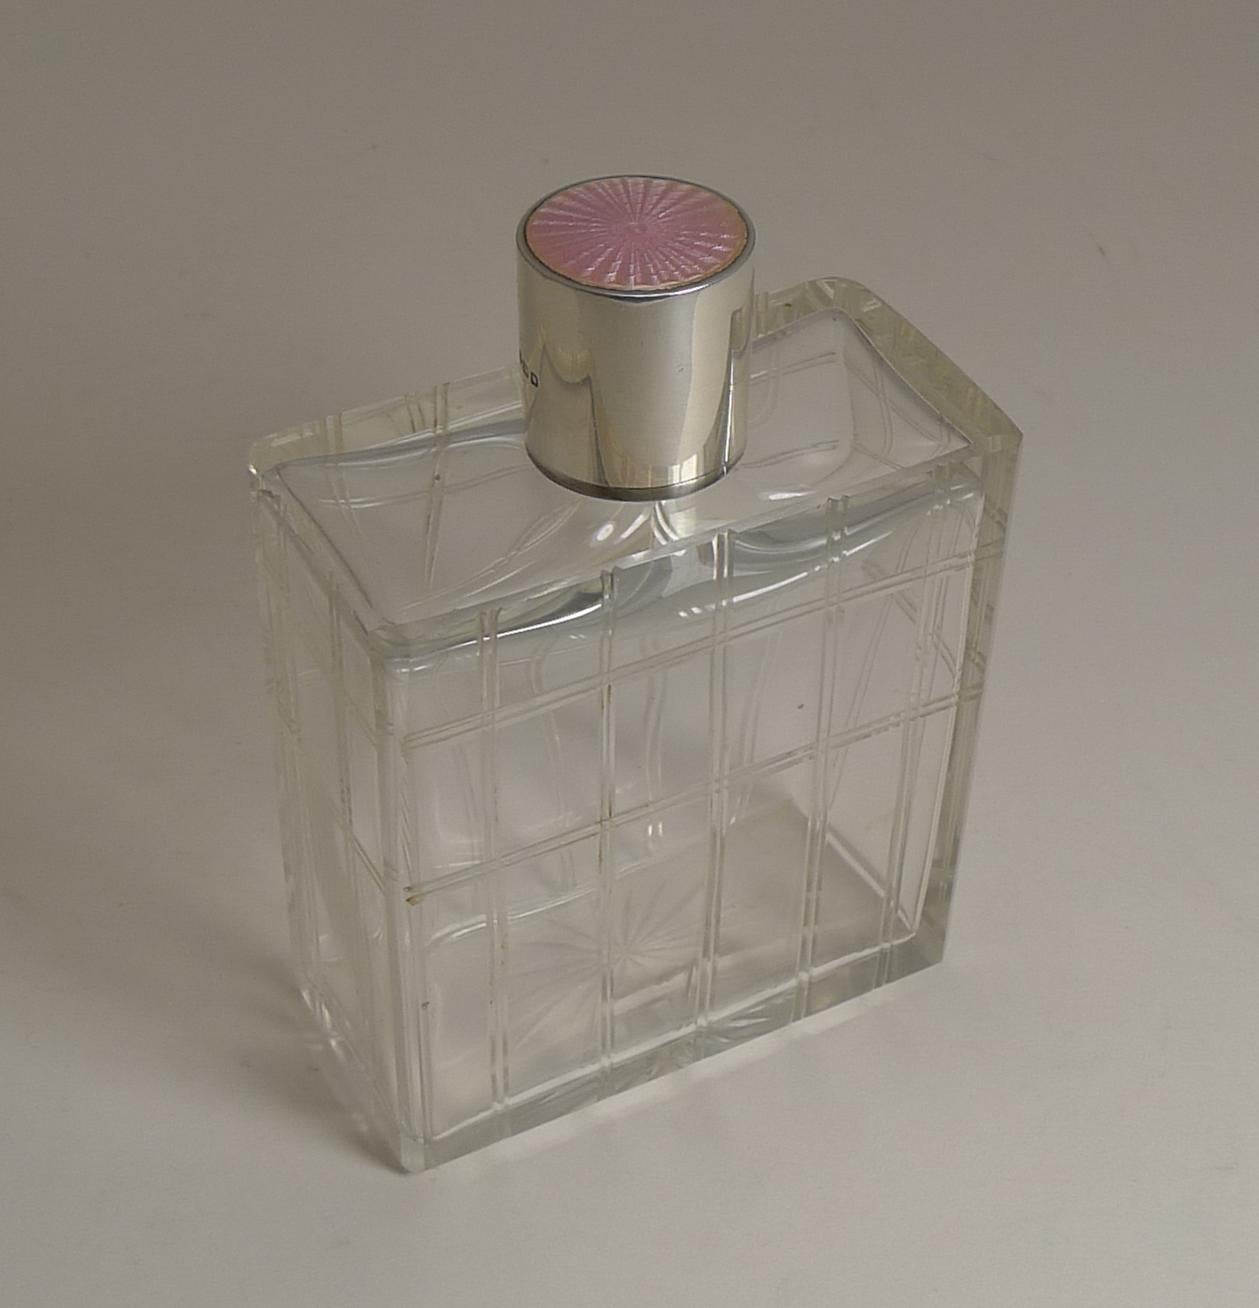 A handsome large vintage cologne or scent bottle engraved with a very modern geometric design.

The screw top is made from English sterling silver fully hallmarked for London 1948, the makers mark is also present for the top-notch silversmith,